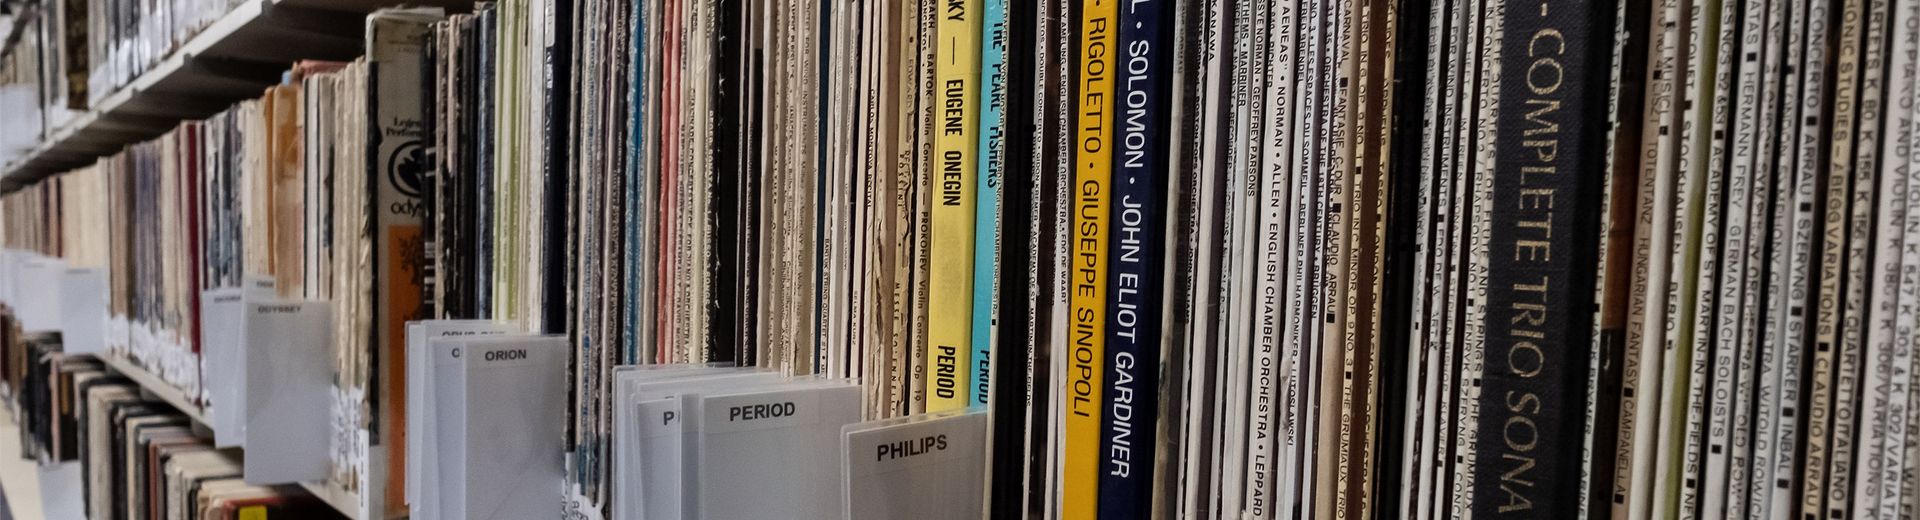 Records in the music library.